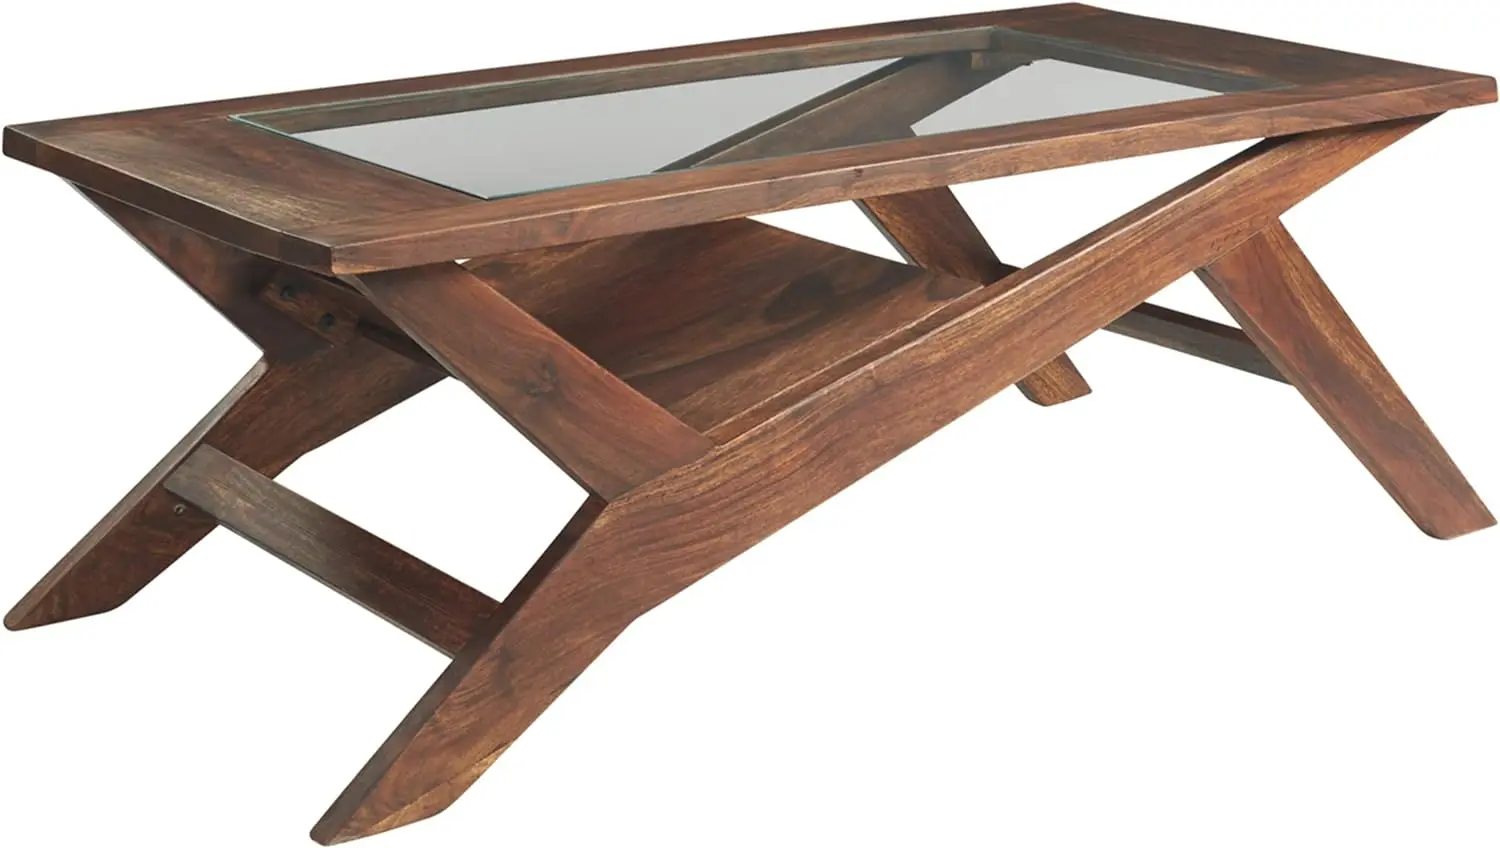 

Signature Design by Ashley Charzine Contemporary Rectangular Coffee Table with Clear Tempered Glass Top, Brown